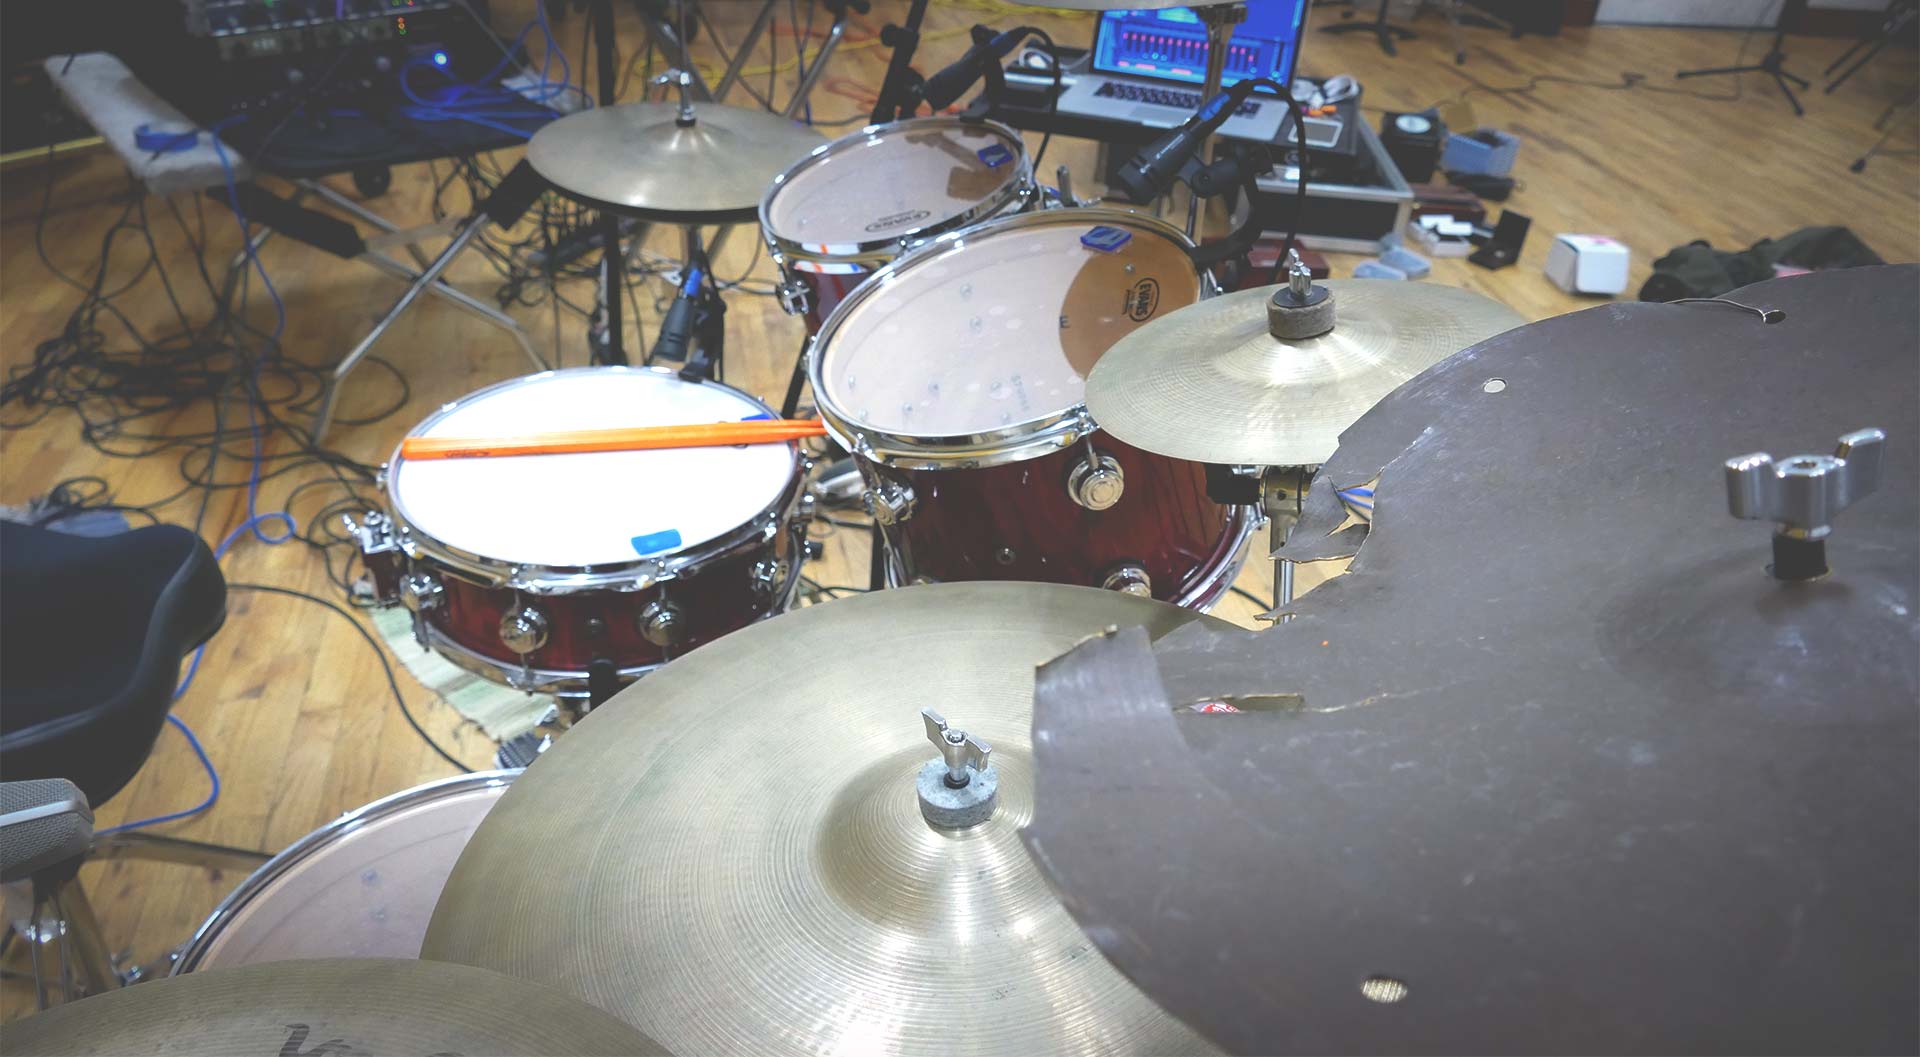 Madder and Madder - our new MAD Drum kit series is underway.